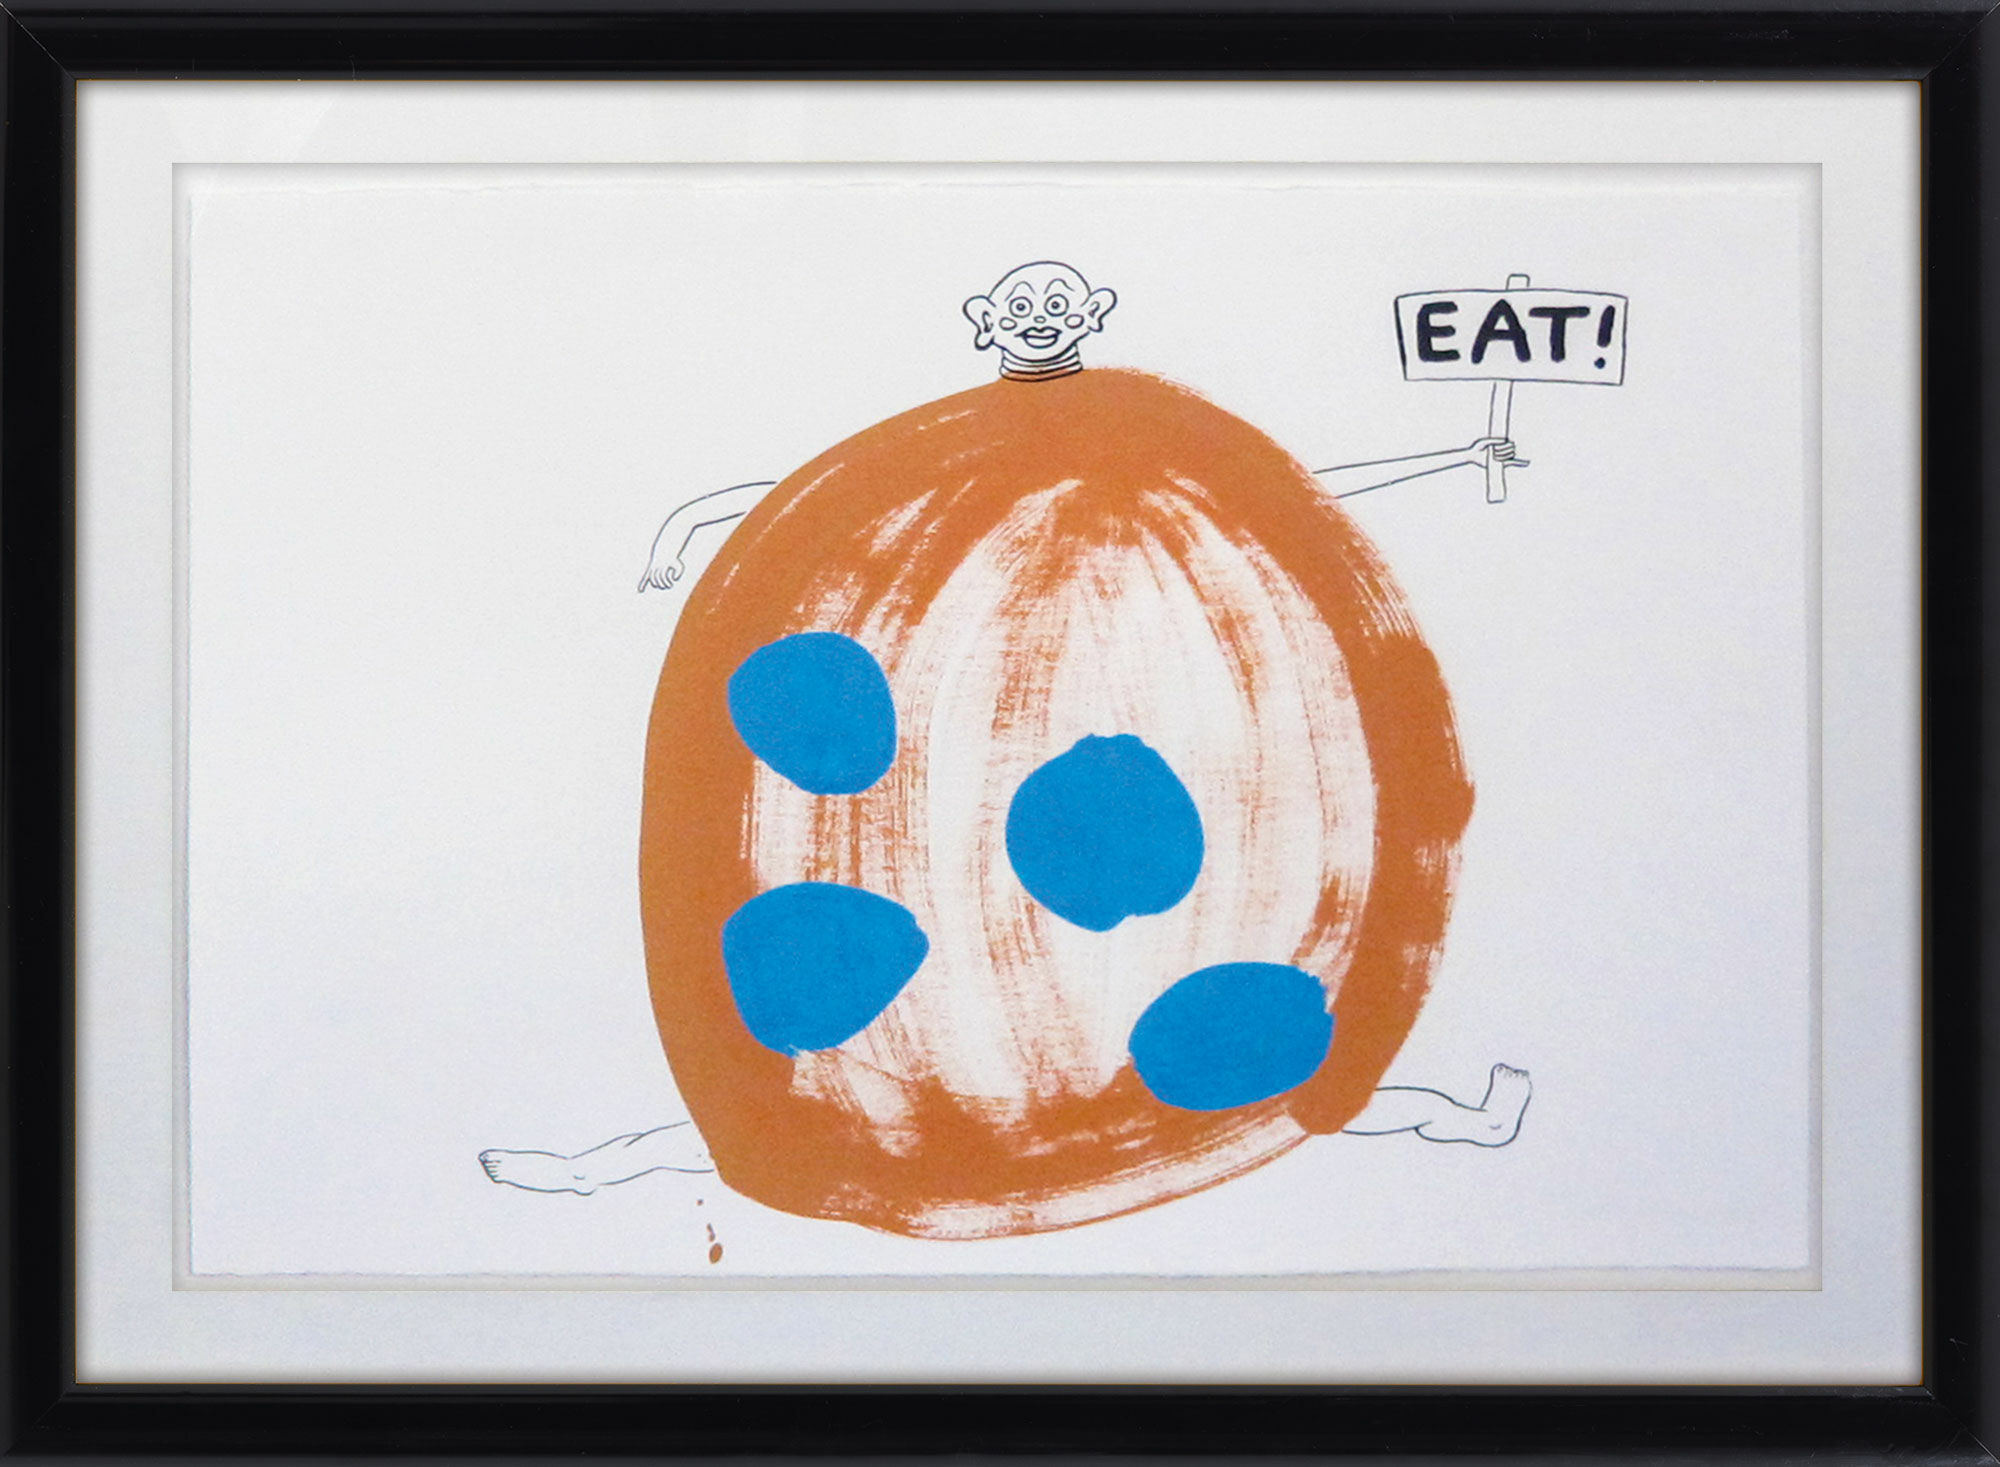 Picture "EAT" (1988) (Unique piece) by Keith Haring